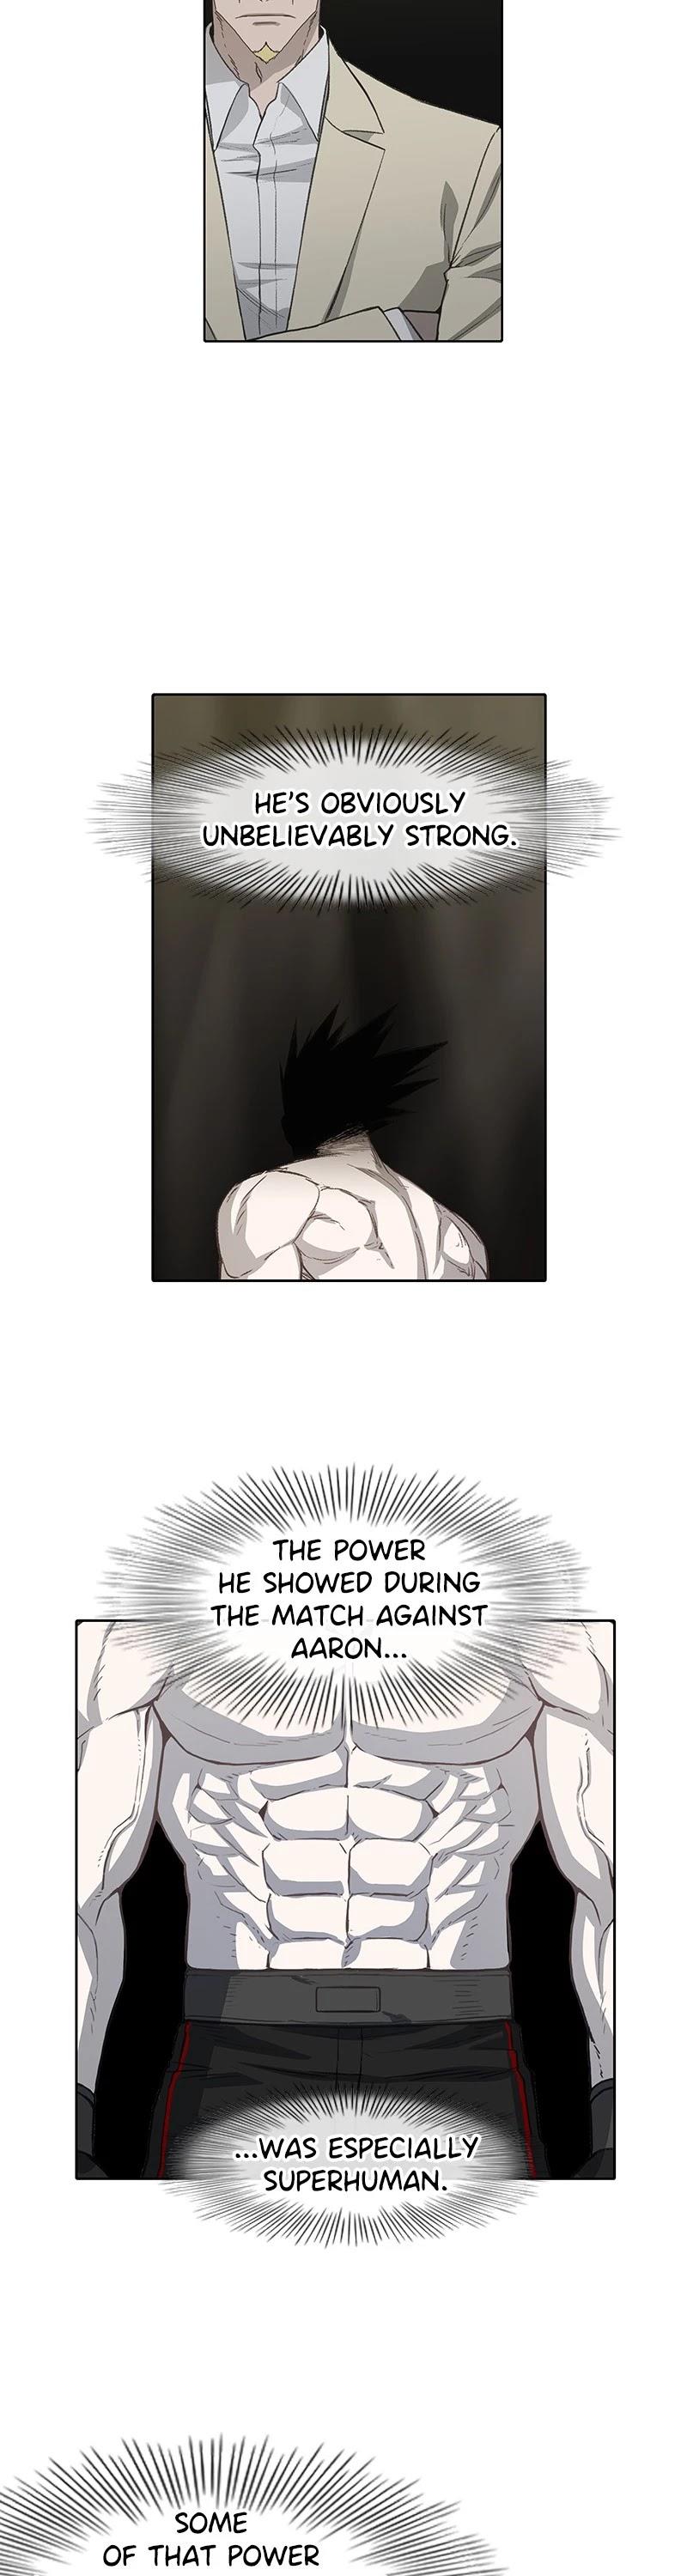 The Boxer Chapter 109: Ep. 99 - Darkness (2) page 32 - 